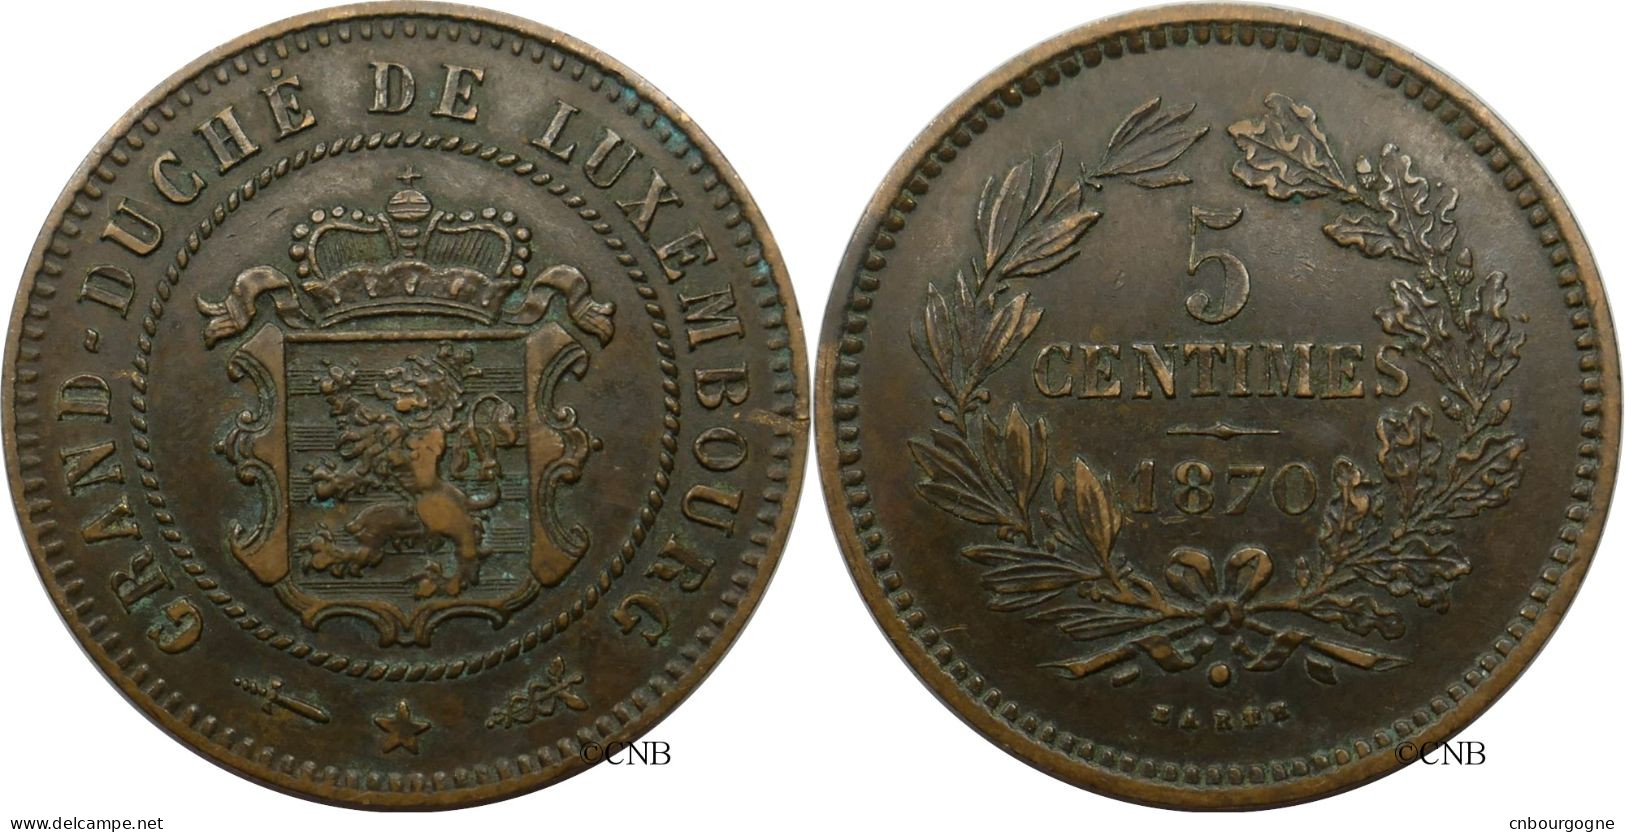 Luxembourg - Grand-Duché - Willem III - 5 Centimes 1870 - TTB+/AU50 - Mon5823 - Luxembourg